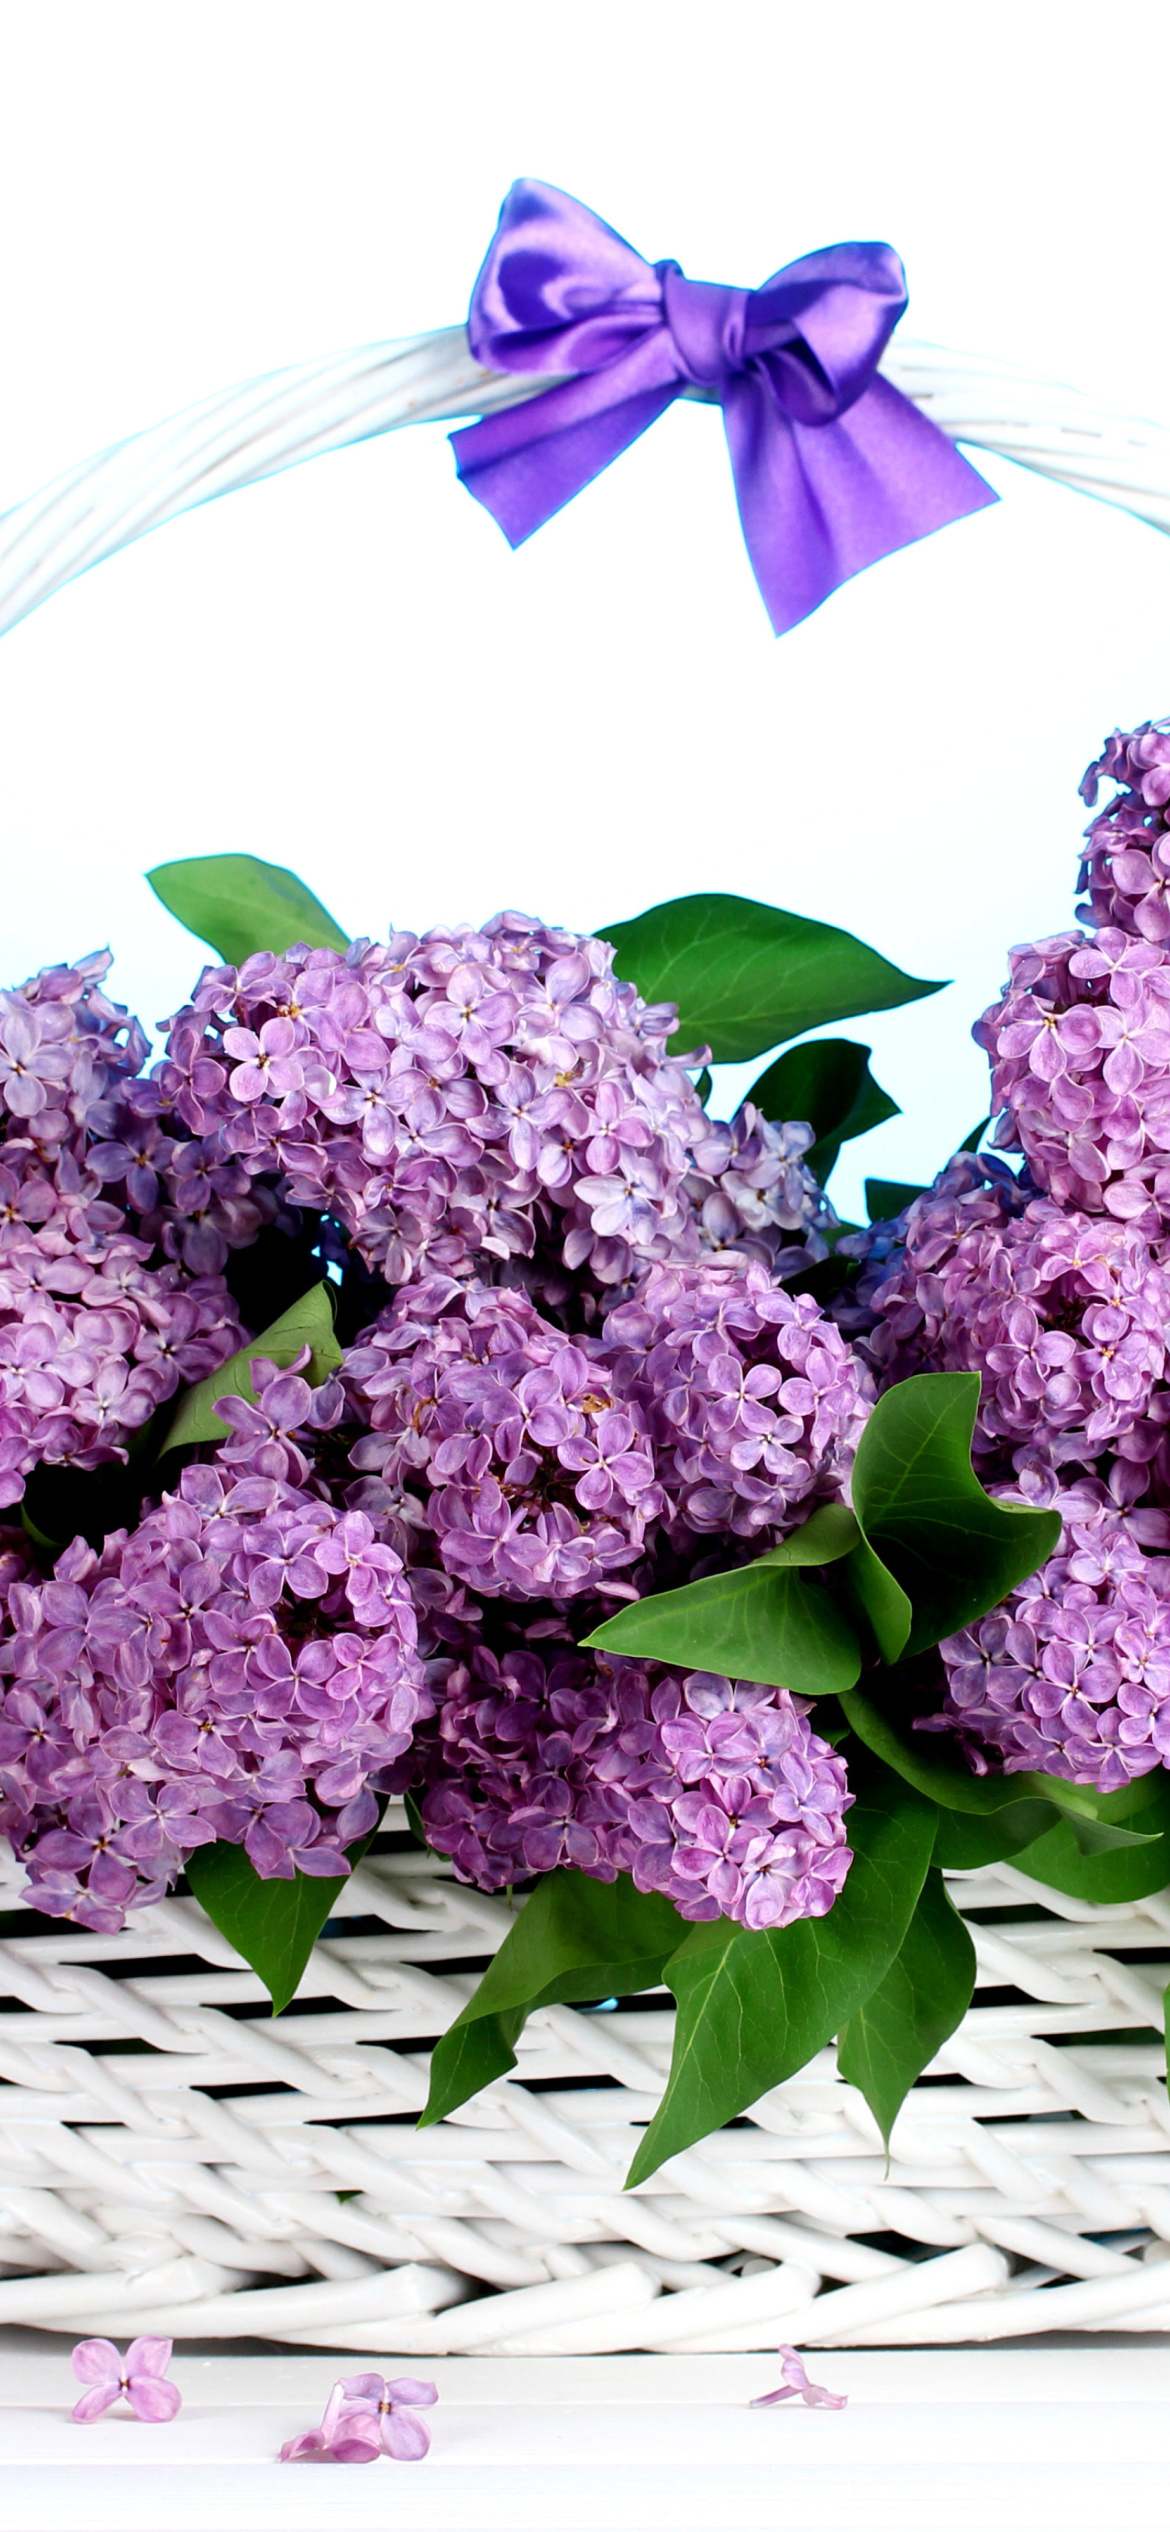 Baskets with lilac flowers screenshot #1 1170x2532